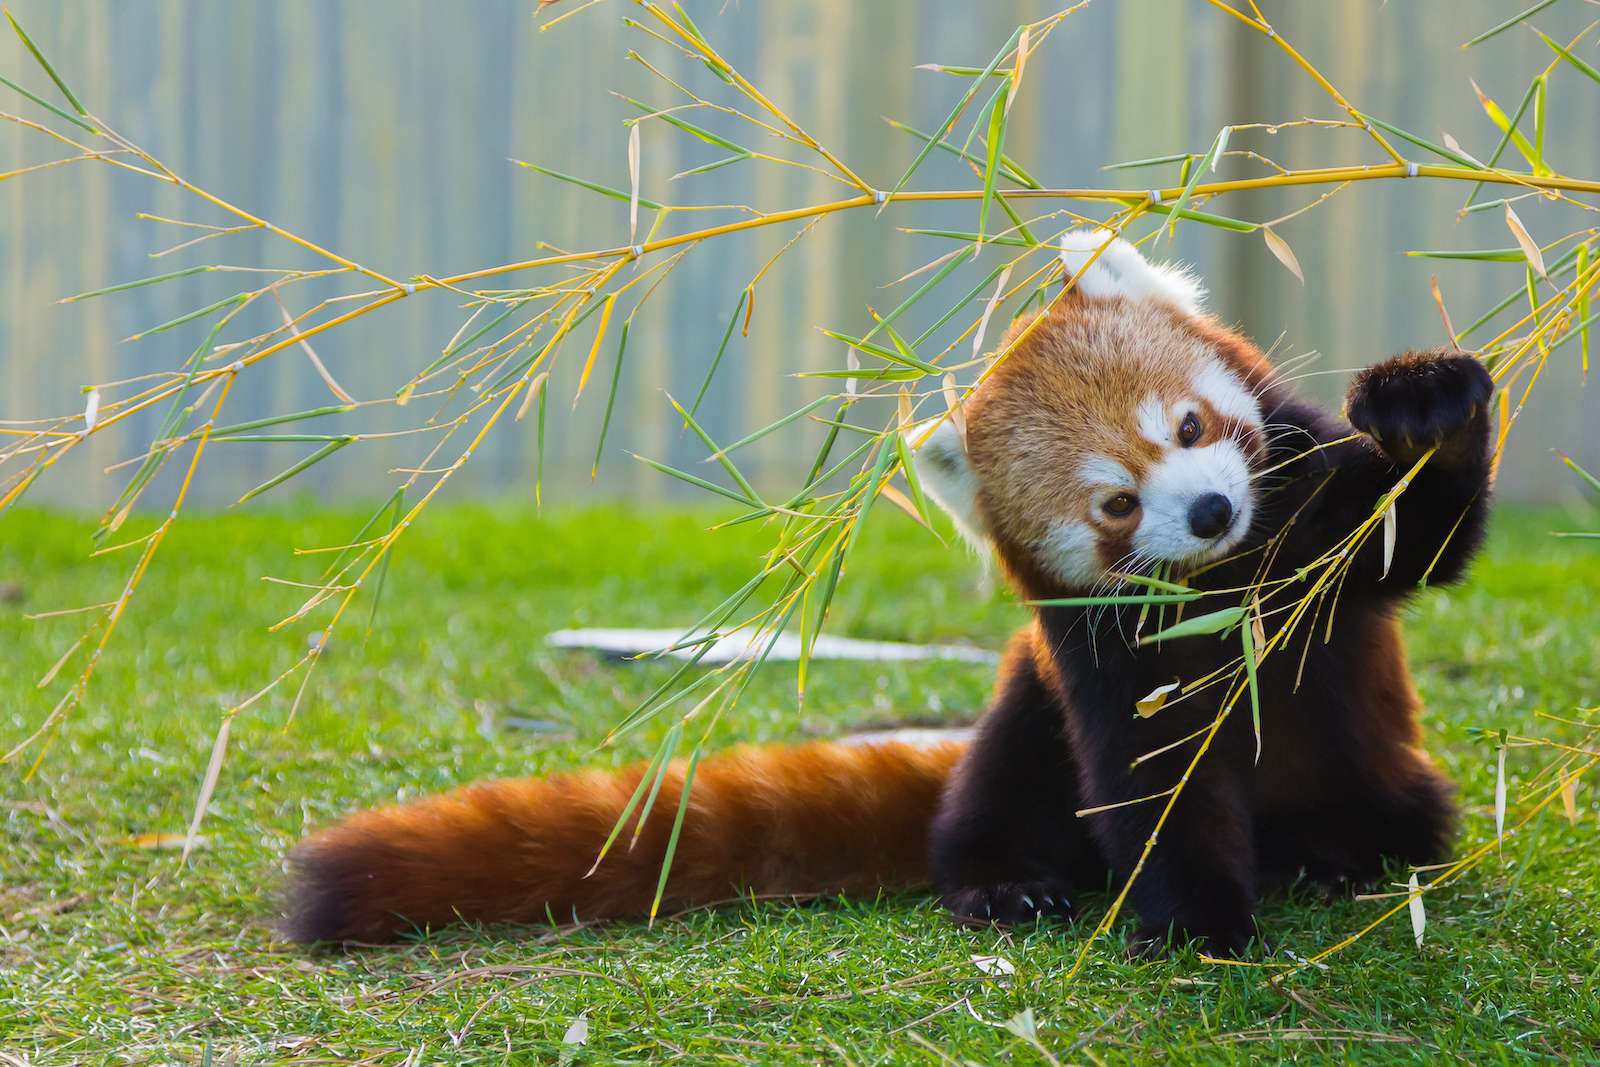 The red panda playing with a plant. 